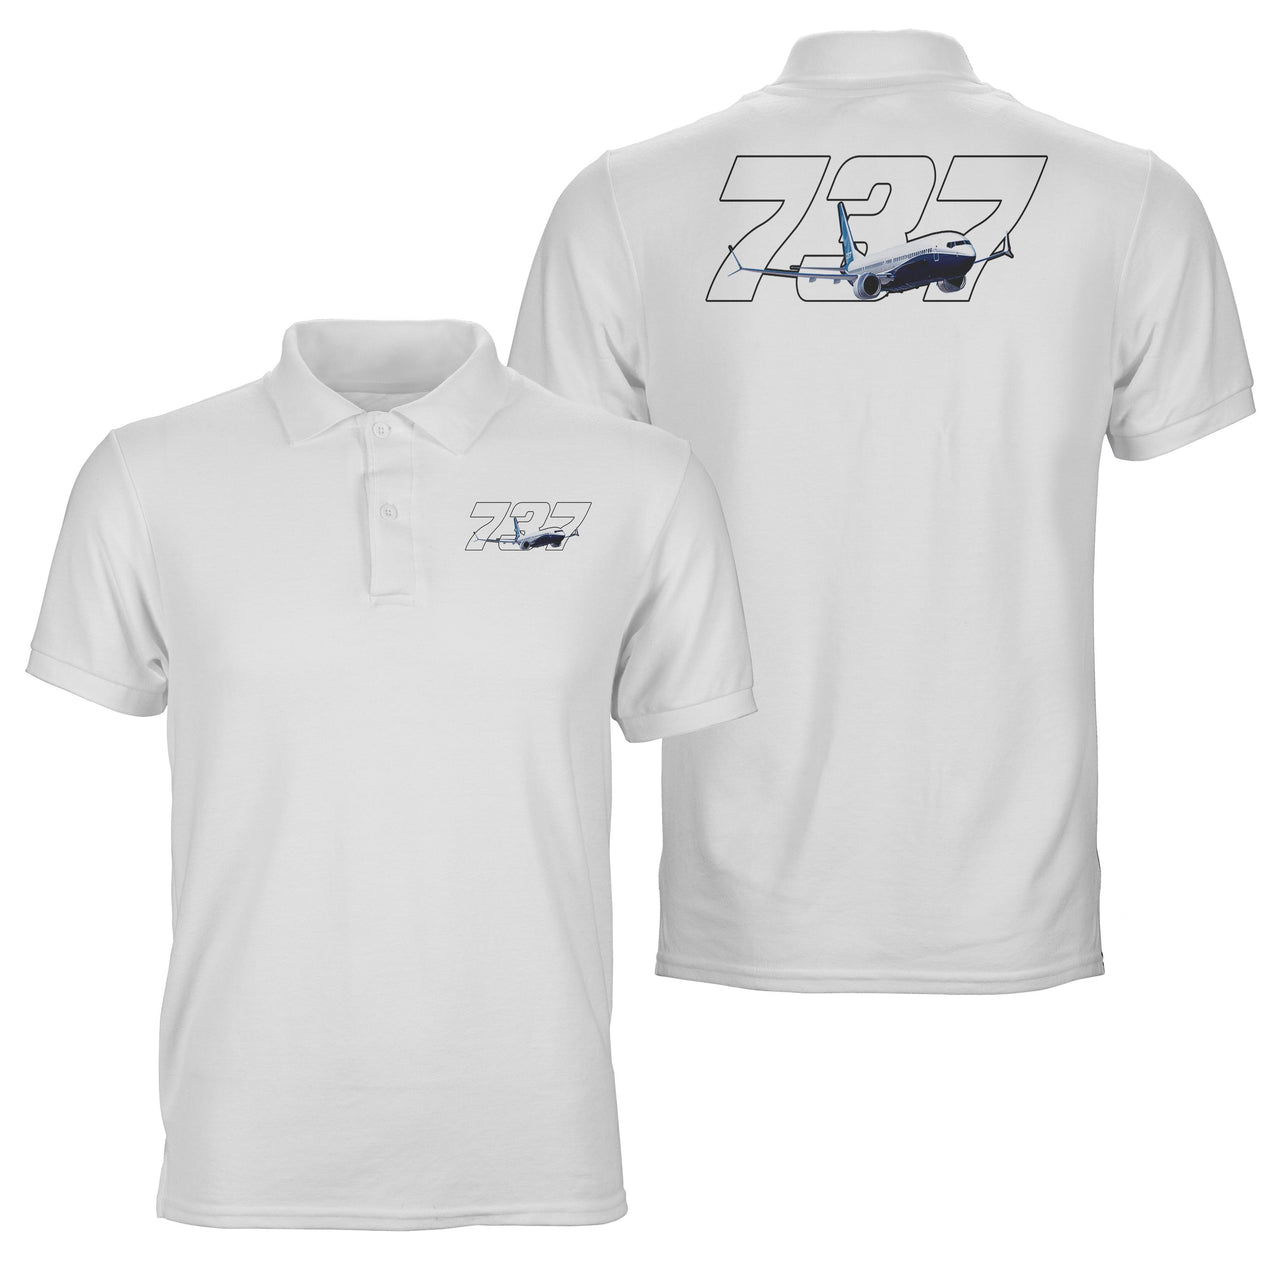 Super Boeing 737 Designed Double Side Polo T-Shirts